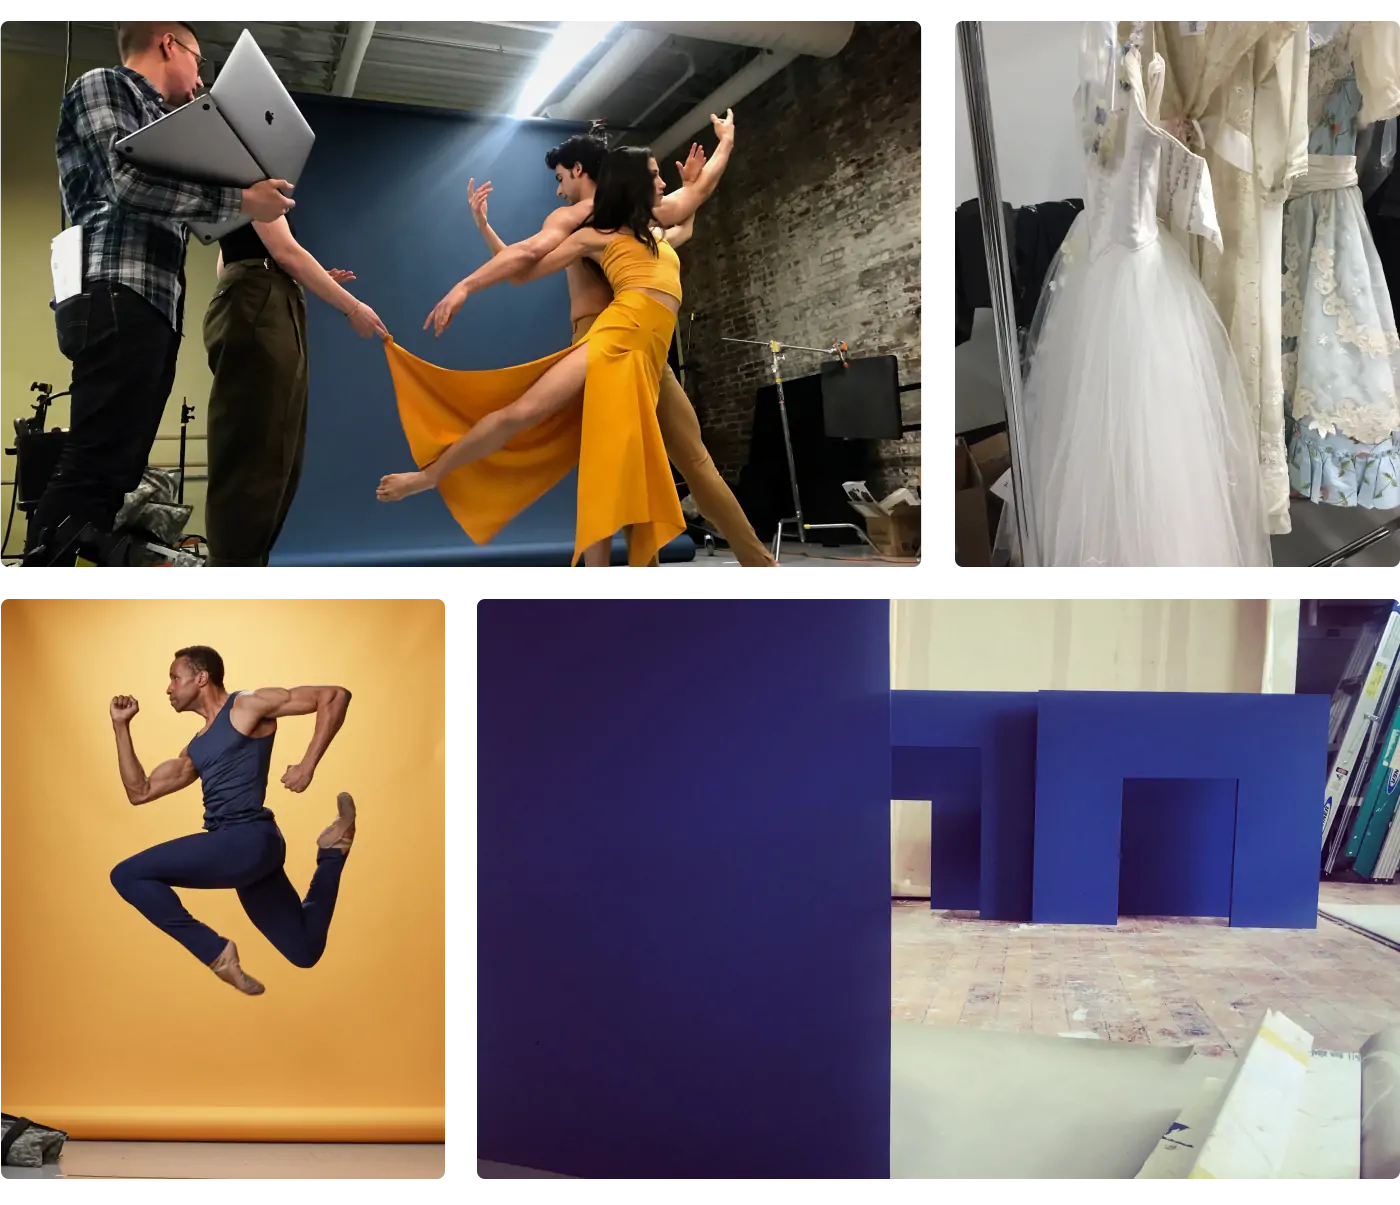 Collage of behinds the scene at the photo shoot. The first image show the creative direction team guiding the ballet dancers who are posing. The second image shows costumes waiting to be used. The third image captures a ballet dancer as he jumps in the air creating a dramatic pose. The last image features the backdrop and scenery pieces in a deep blue color.